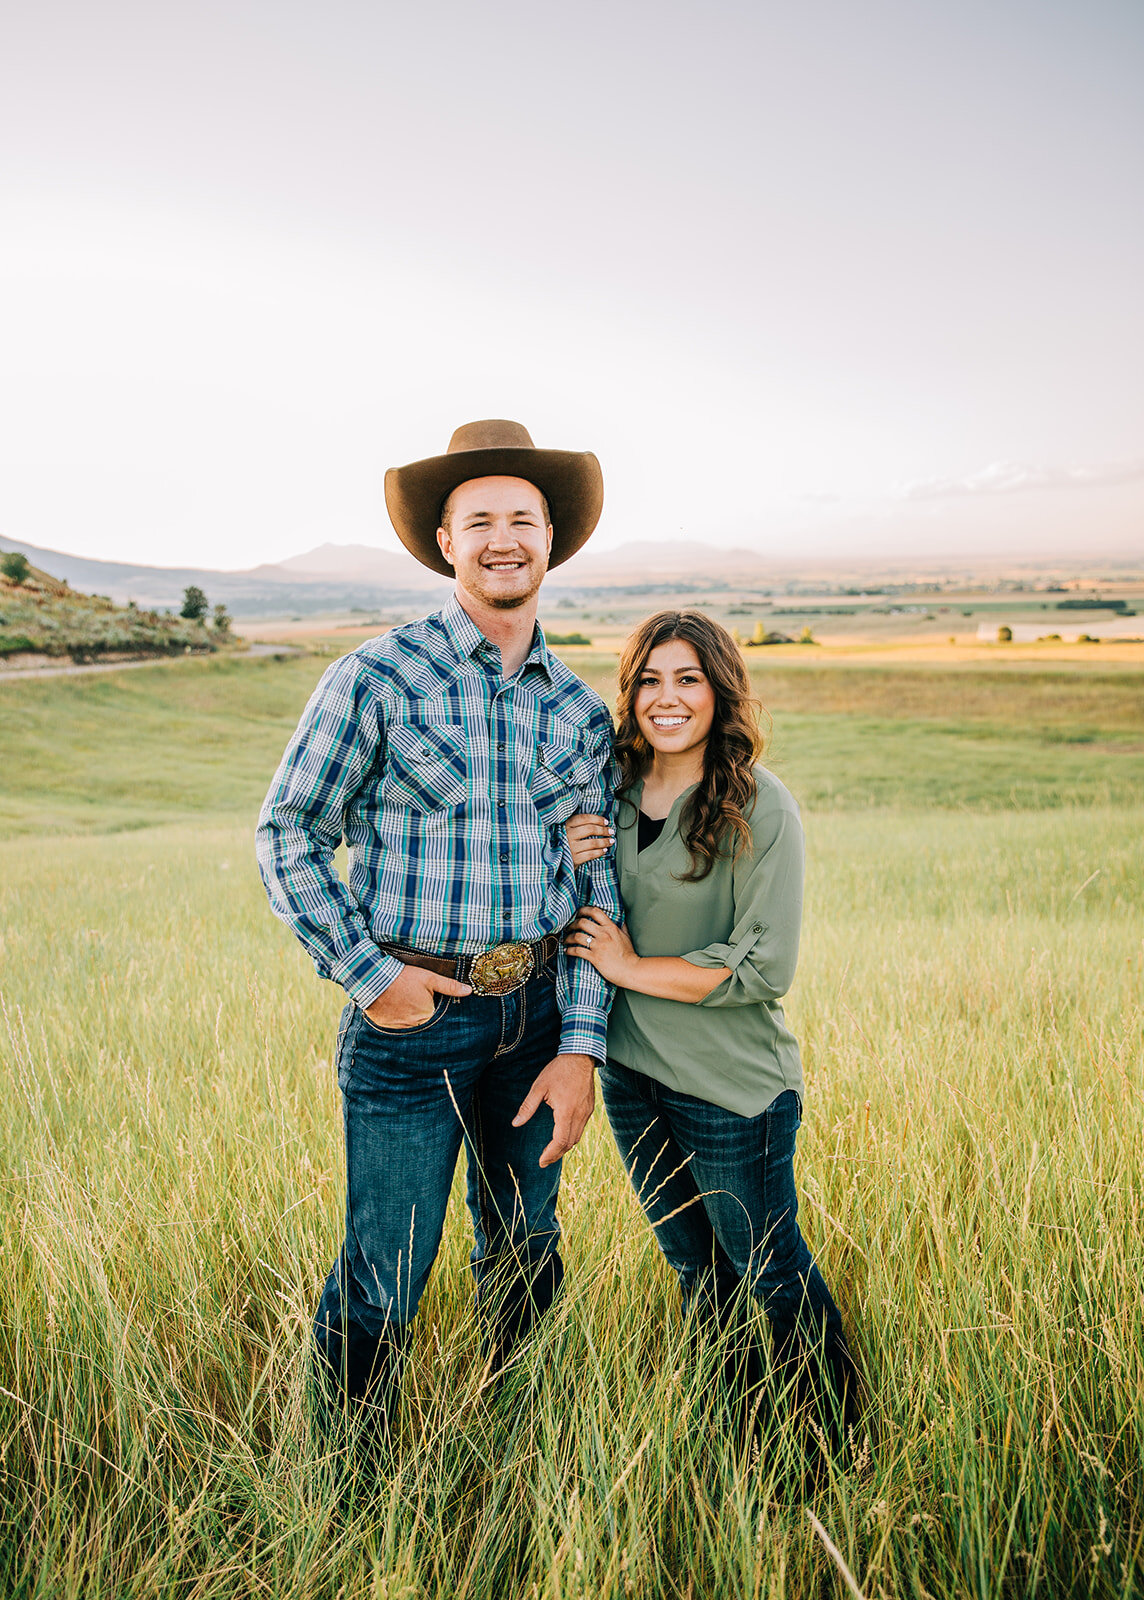  summer time engagement session casual outfit inspo Utah couple swing dancing partners country lovers future husband and wife green field standing posing ideas simple posing hand in pocket engagement posing ideas bride to be professional photographer